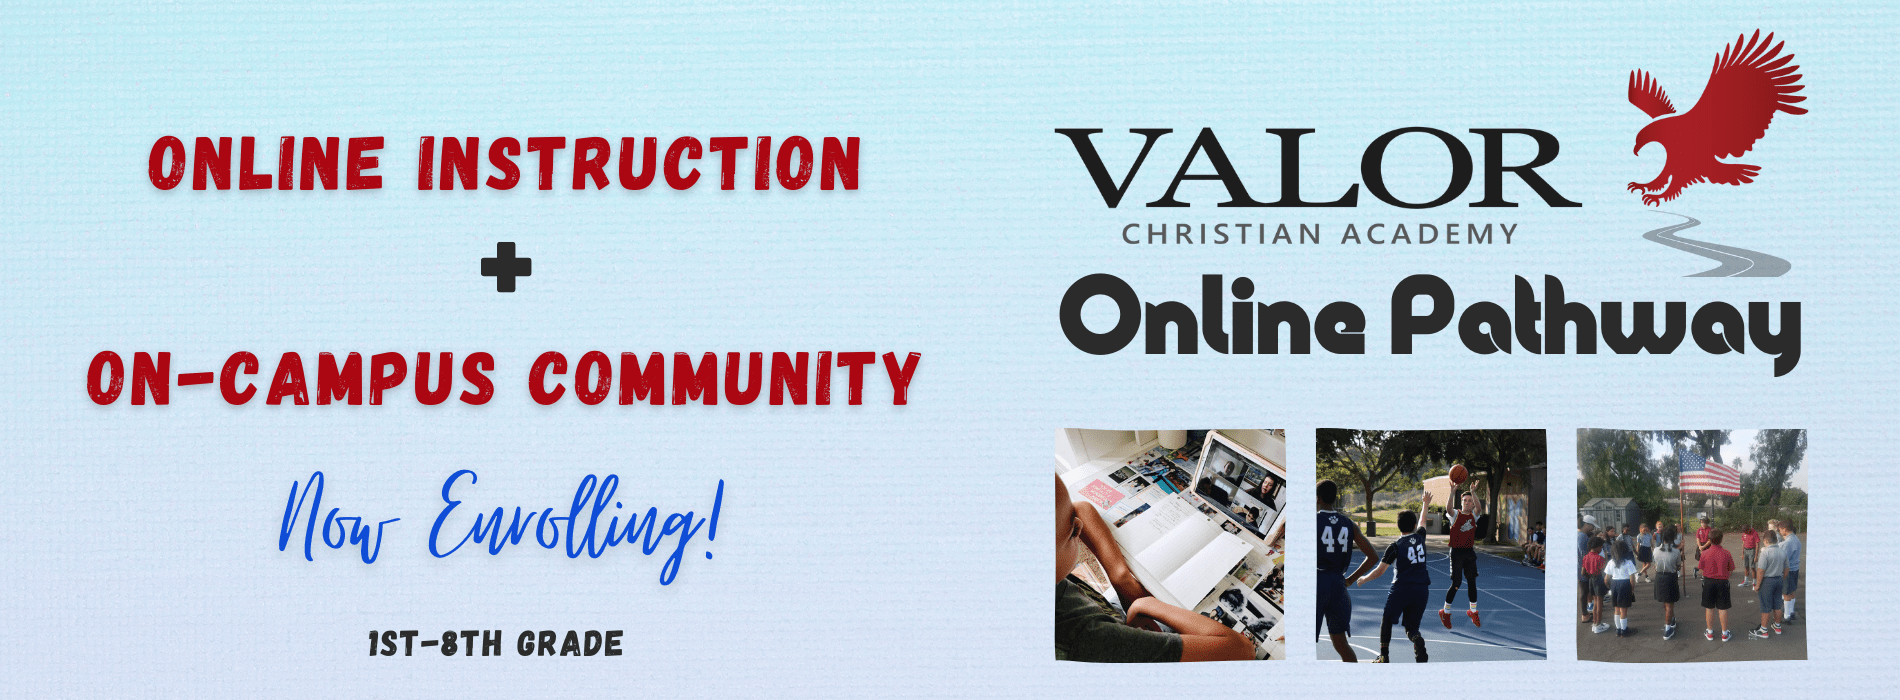 Valor Christian Online Pathway is now enrolling 1st-8th grade